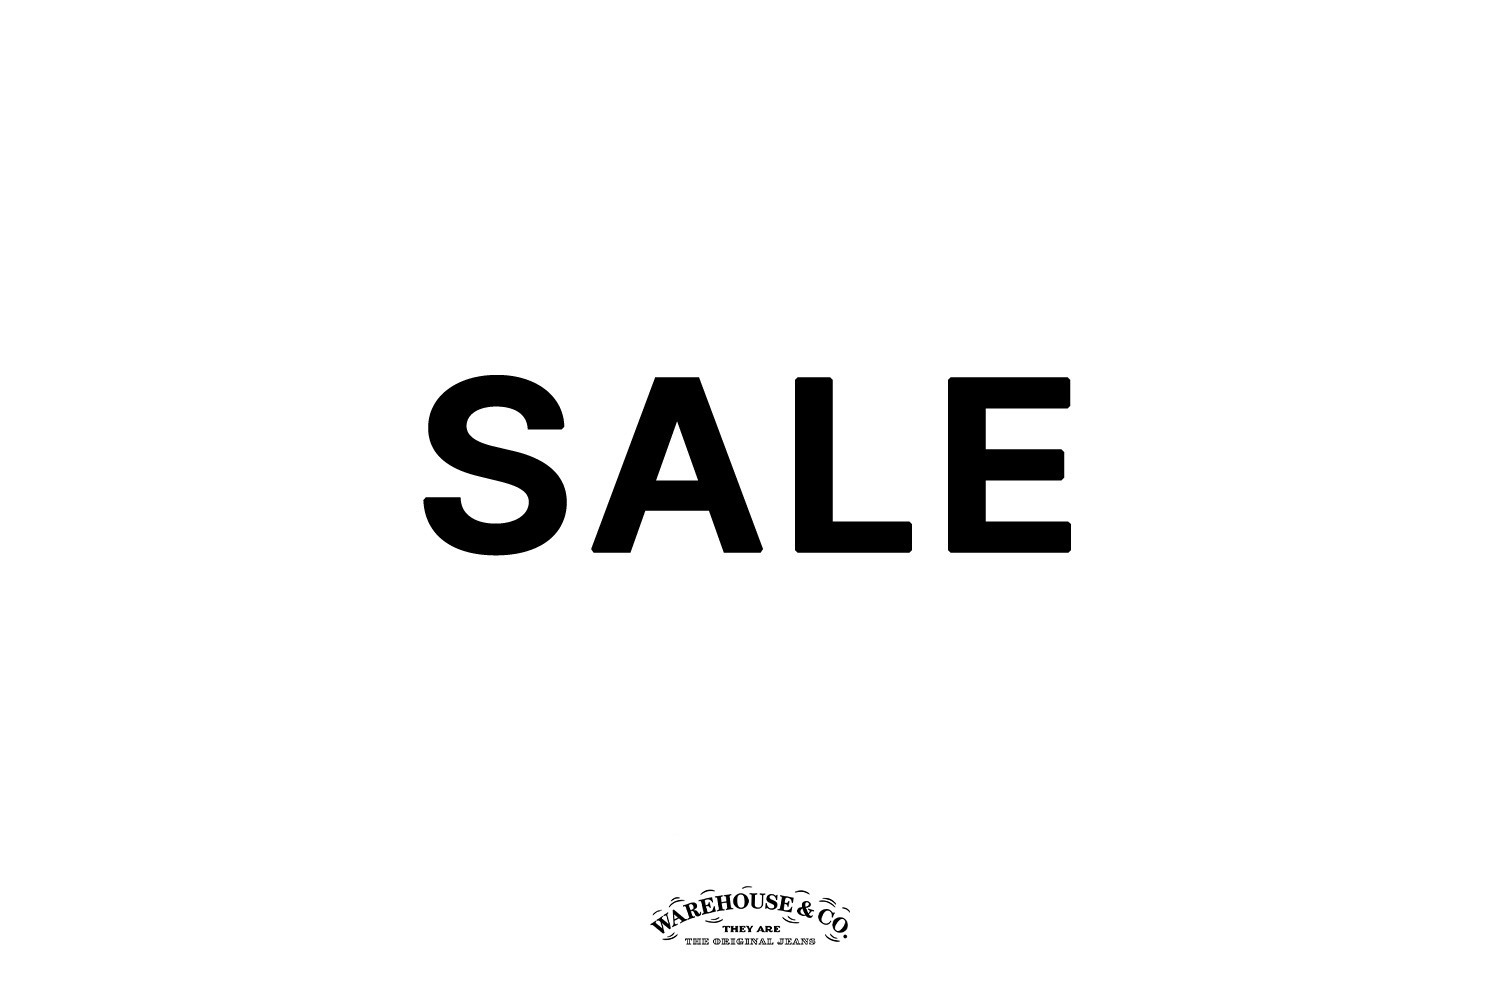 ABOUT SALE